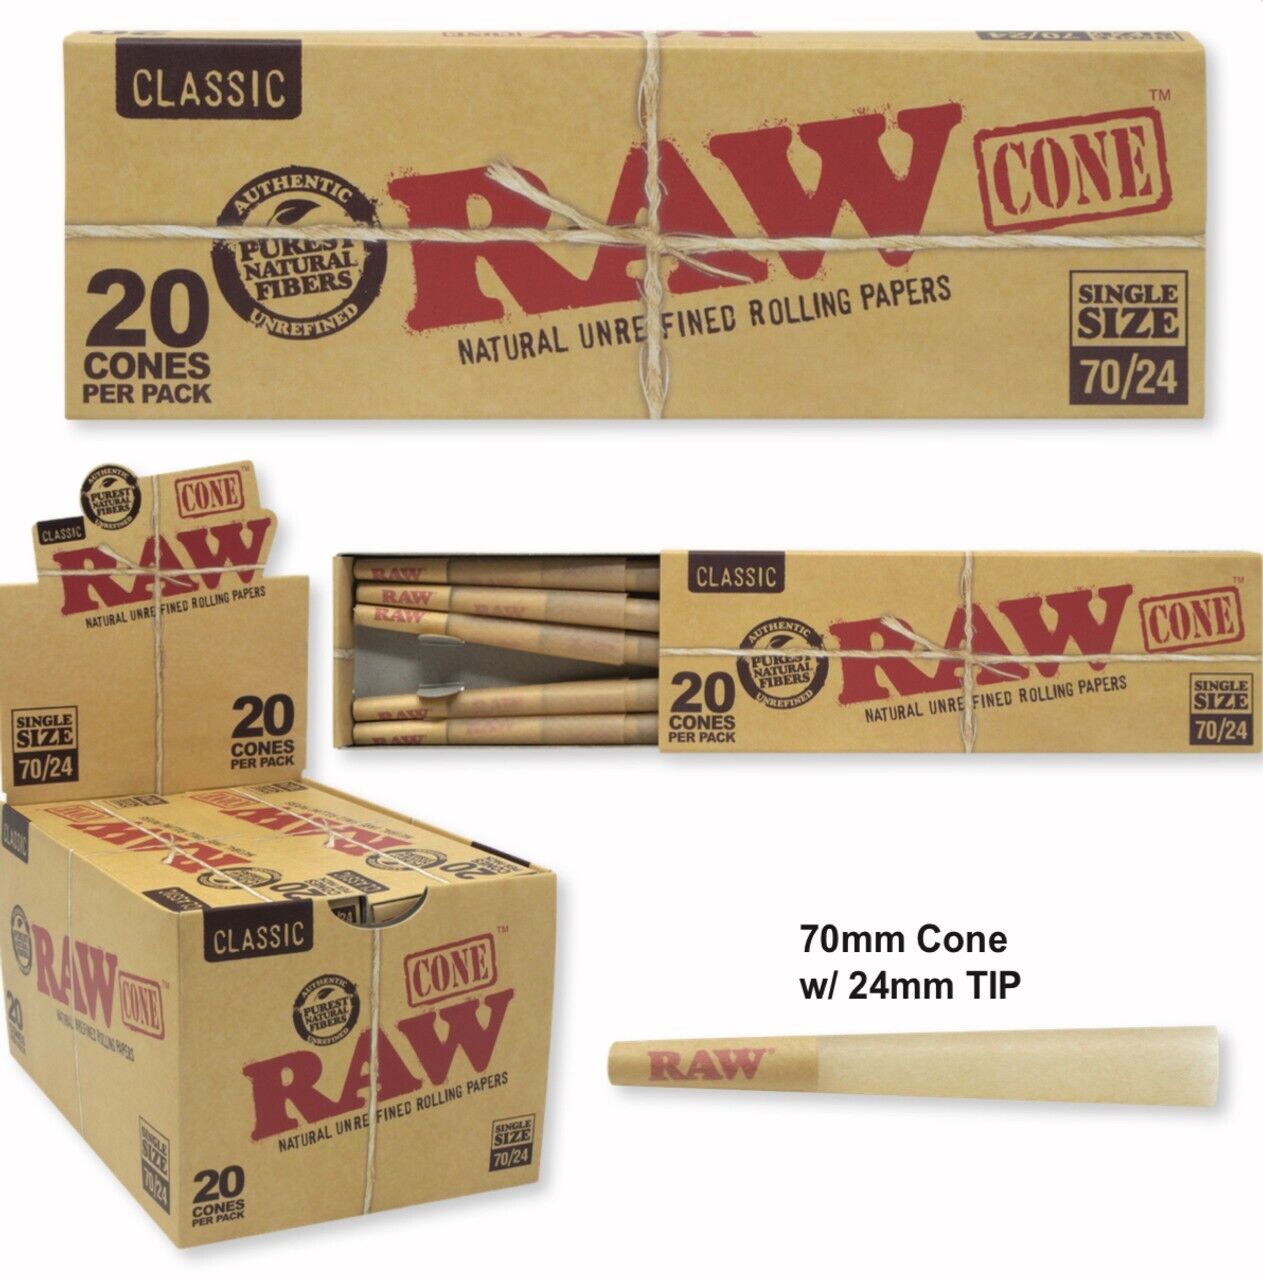 Raw Single Wide Classic CONE Rolling Papers 20 Cones Per PK 1 Pack USA SHIPPED